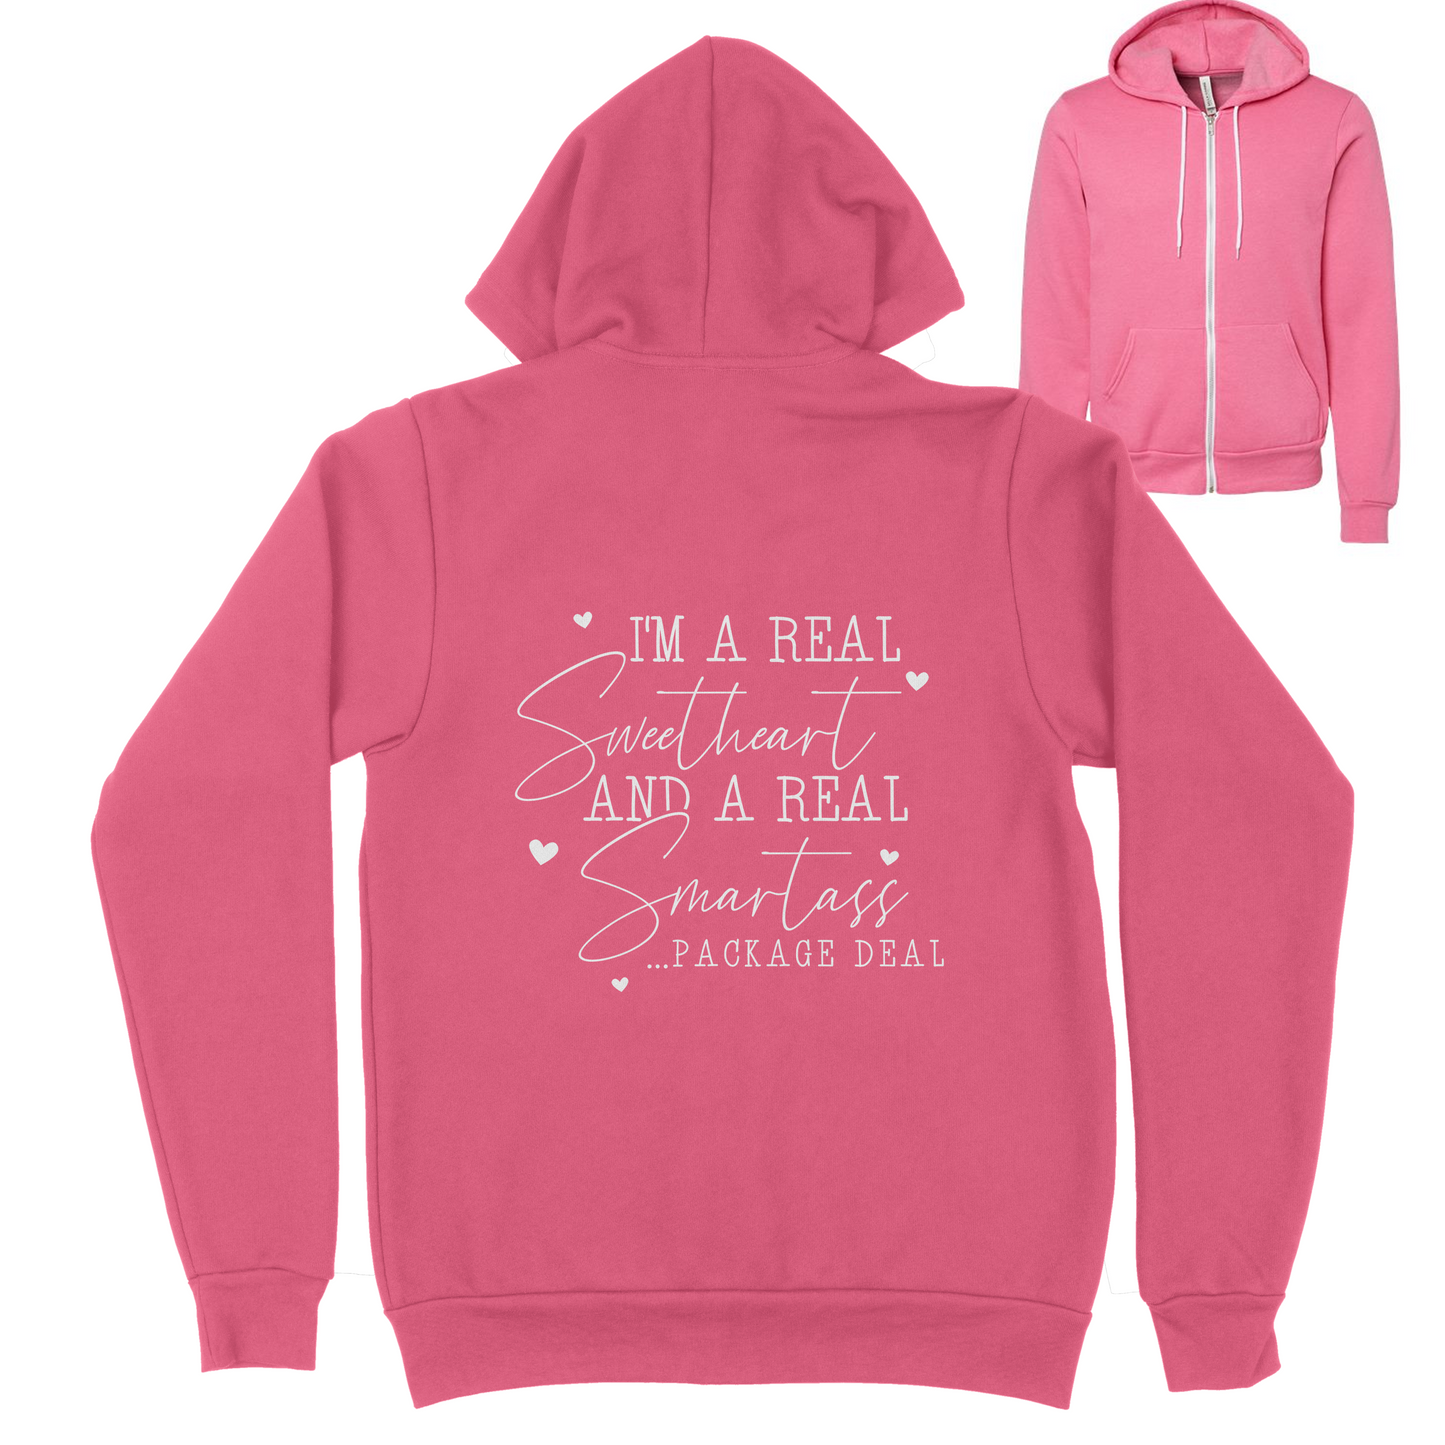 I'm A Real Sweetheart and Smartass Package Deal Zip Up Hoodie